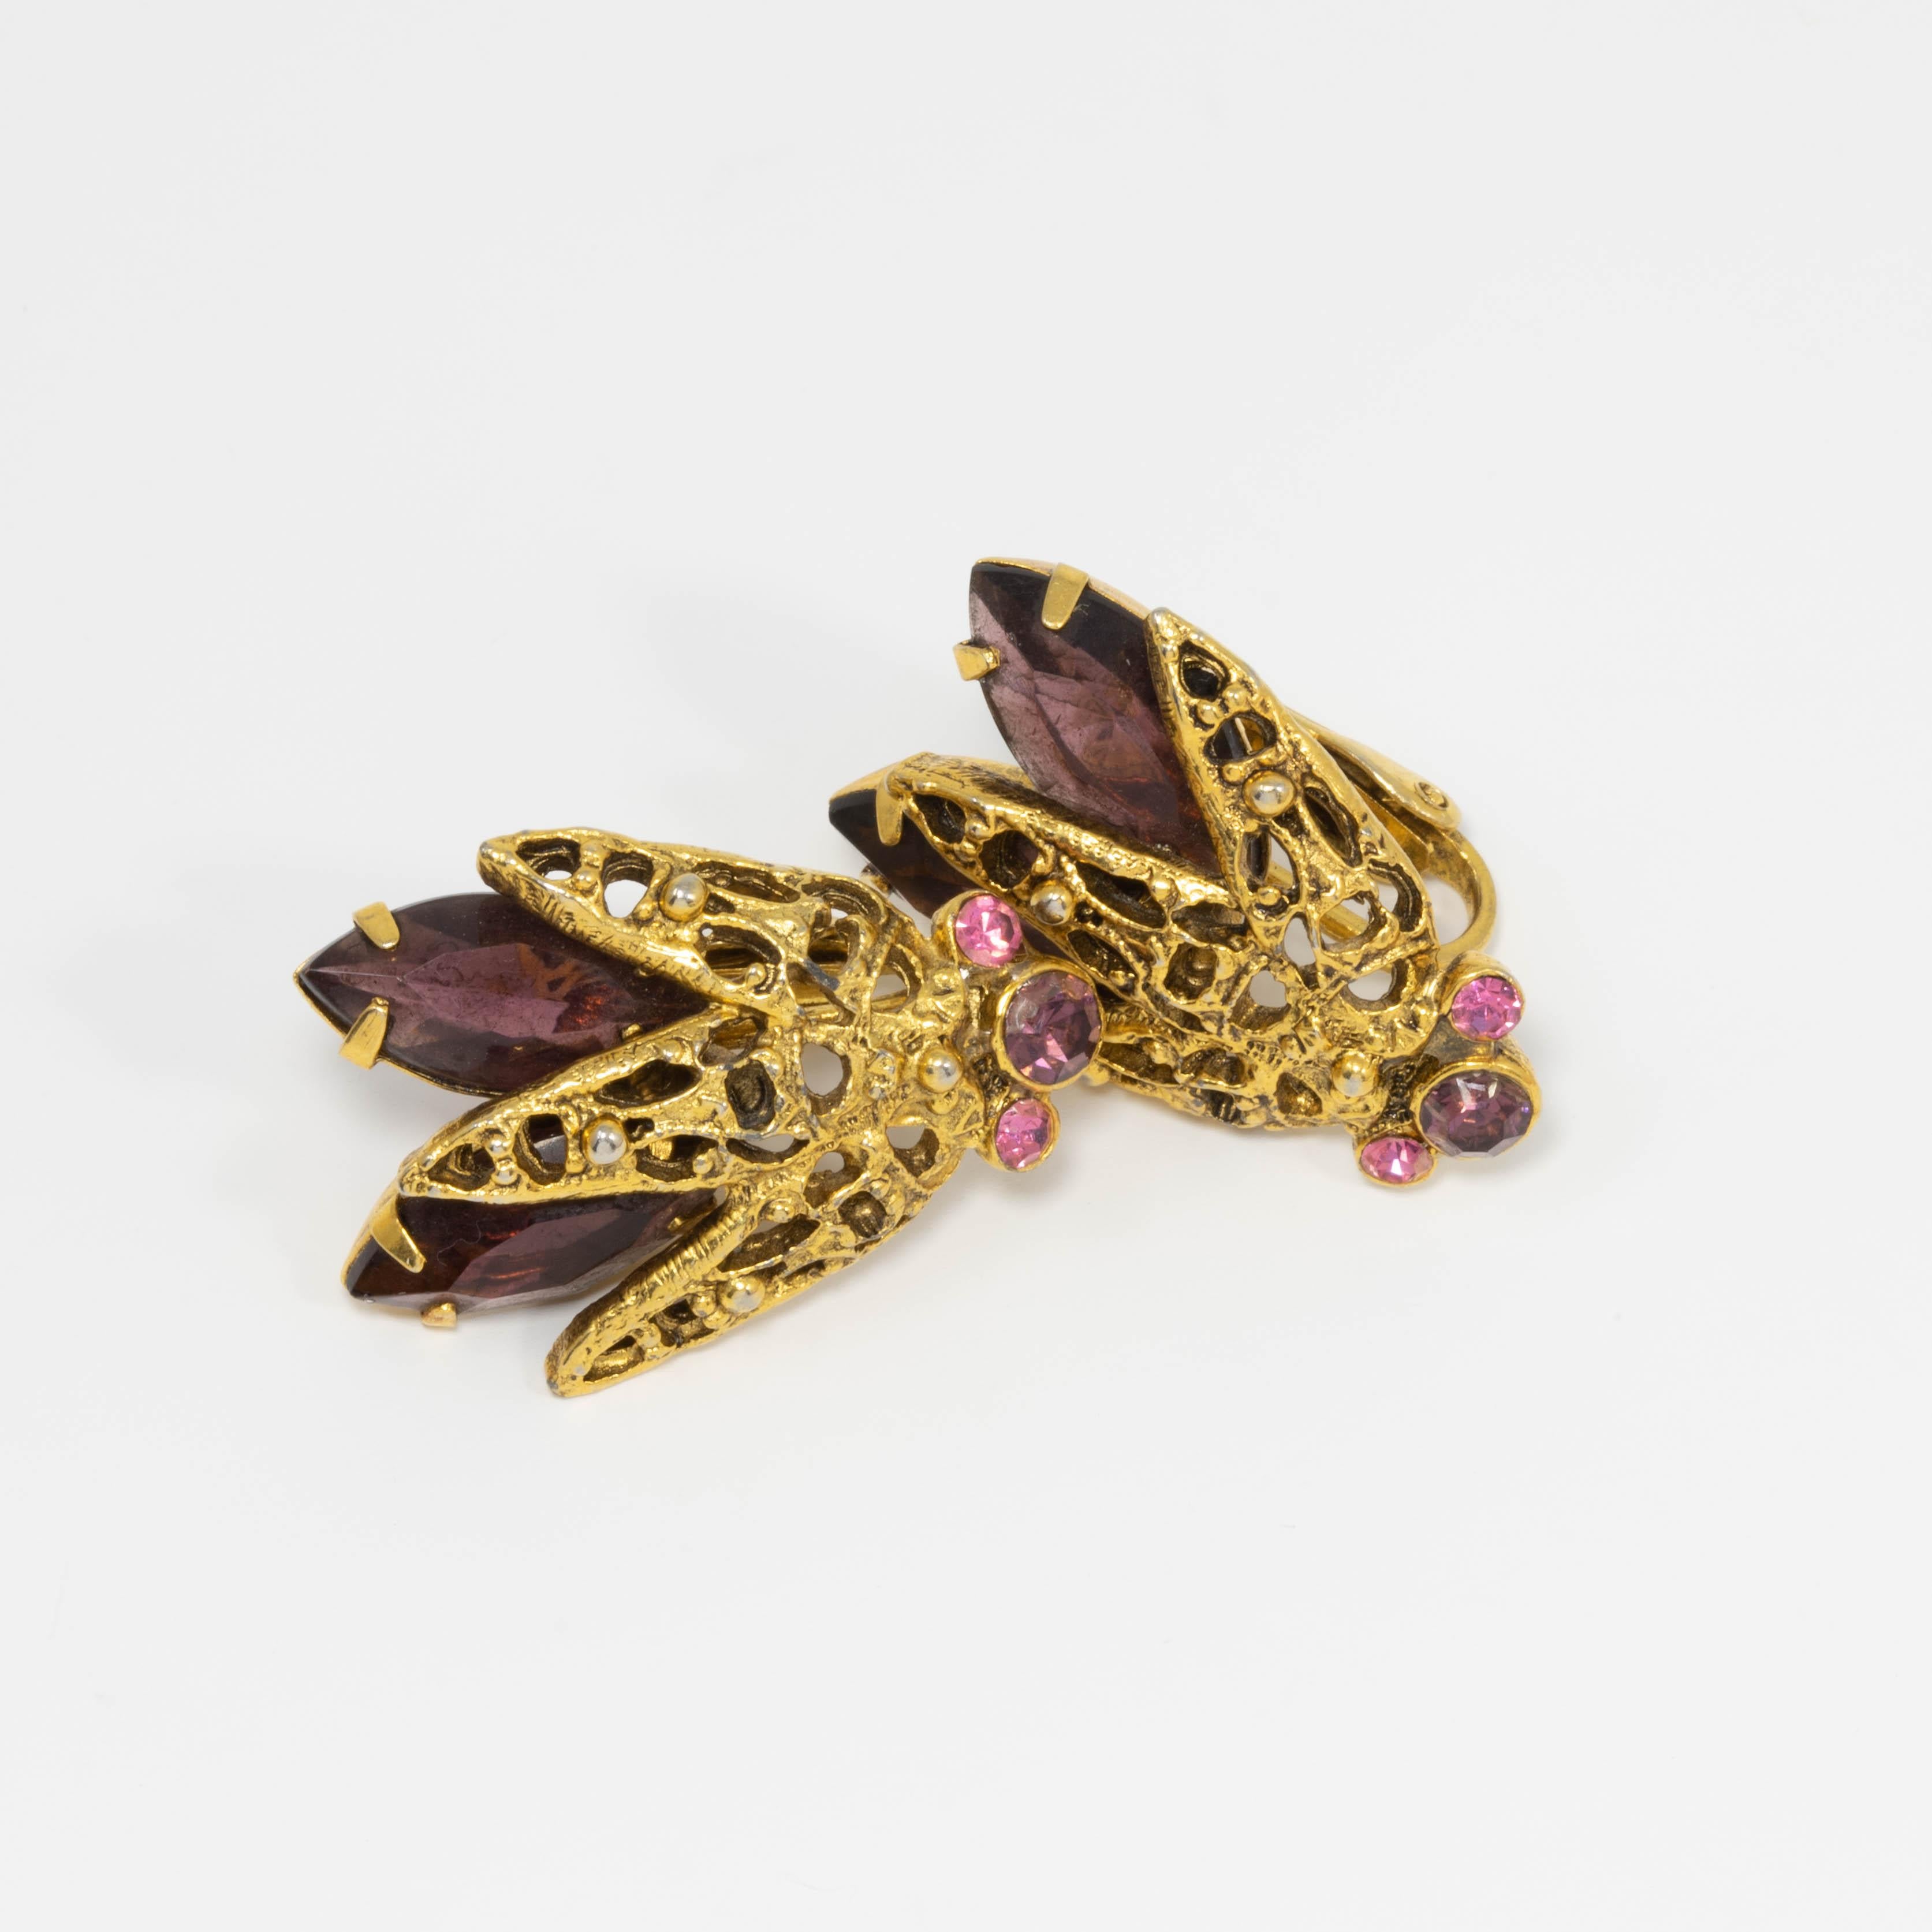 A pair of exquisite flies! Each features an accented, gold-tone body and an assortment of amethyst and rose crystals.

Vintage clip on closure. Circa early to mid 1900s.